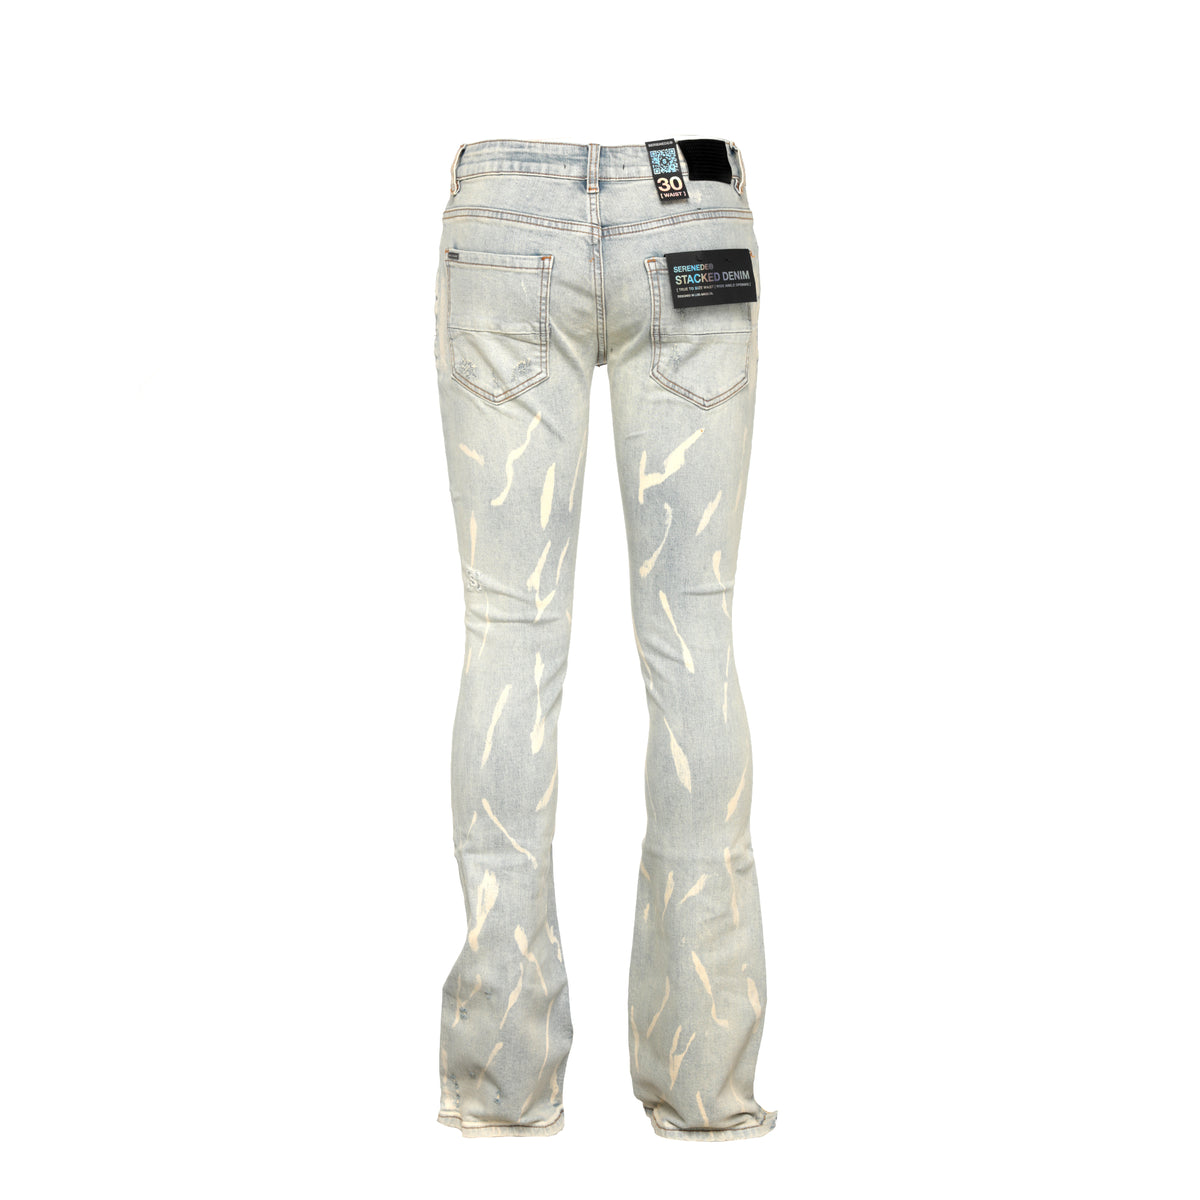 SERENEDE "Sulfur" Men's Stacked Skinny Jeans - SIZE Boutique